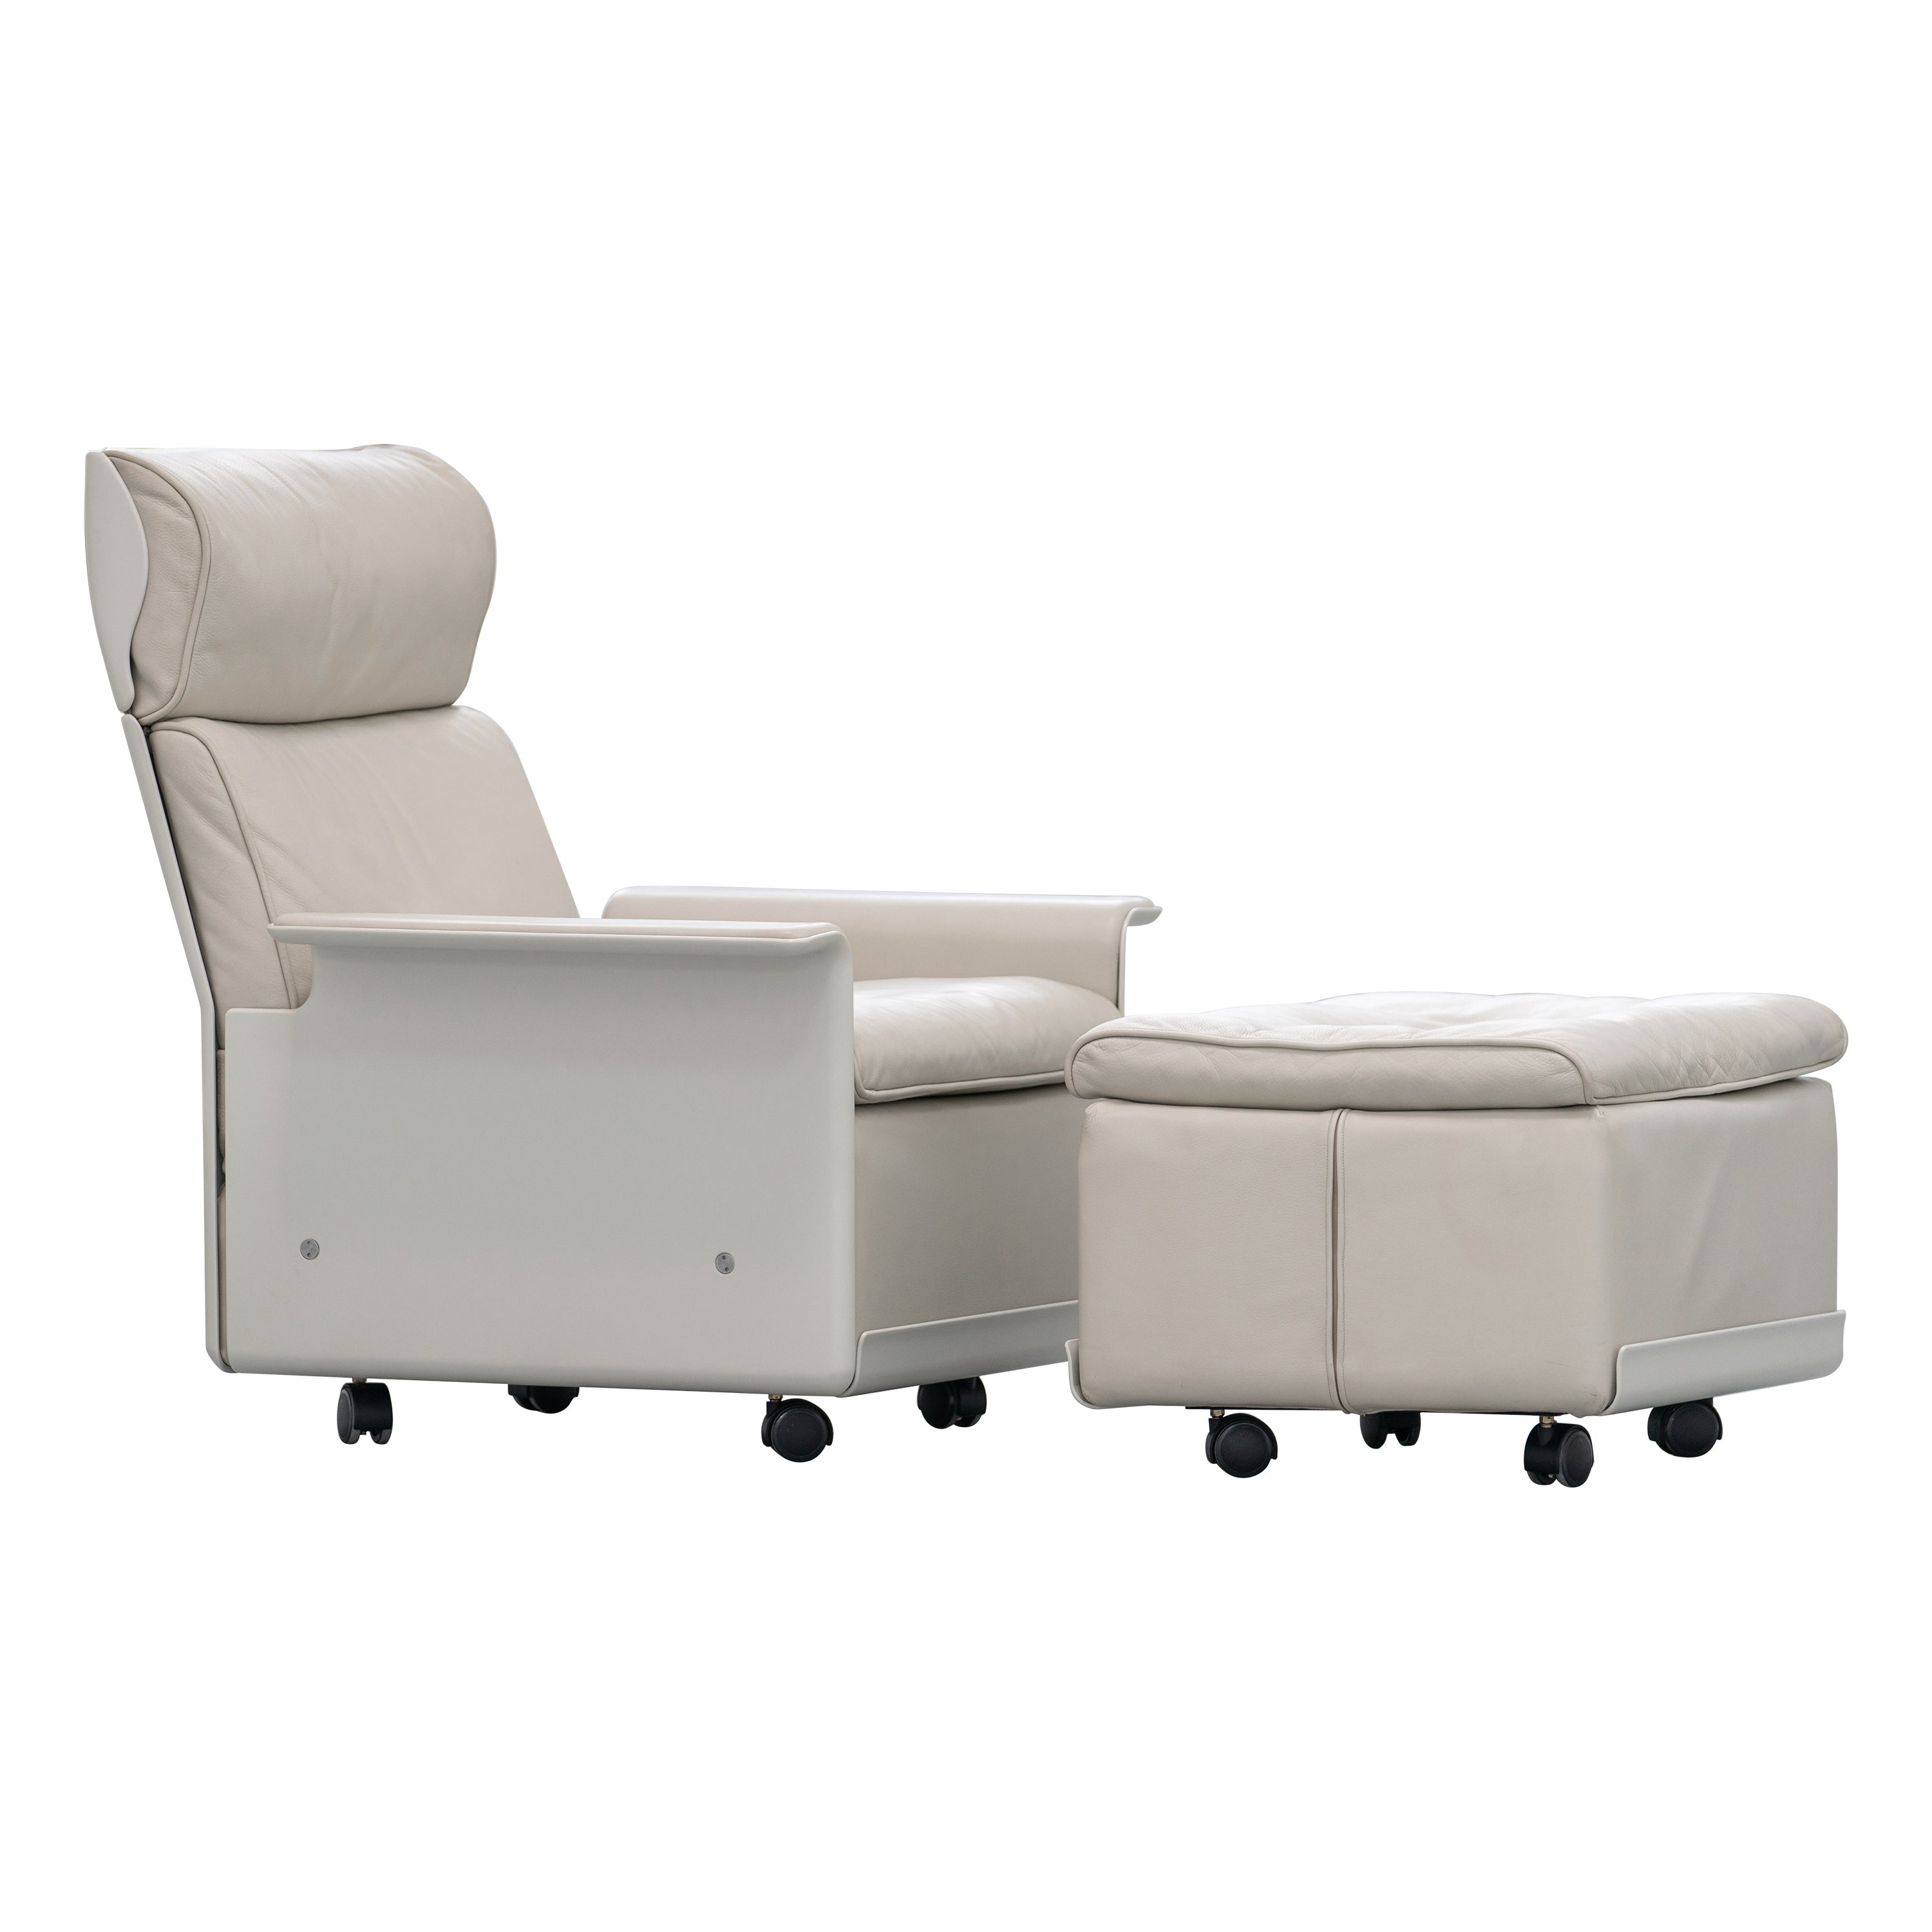 Dieter Rams, Lounge Chair & Ottoman Rz 620 by Vitsœ, Cream-Coloured Leather 1962